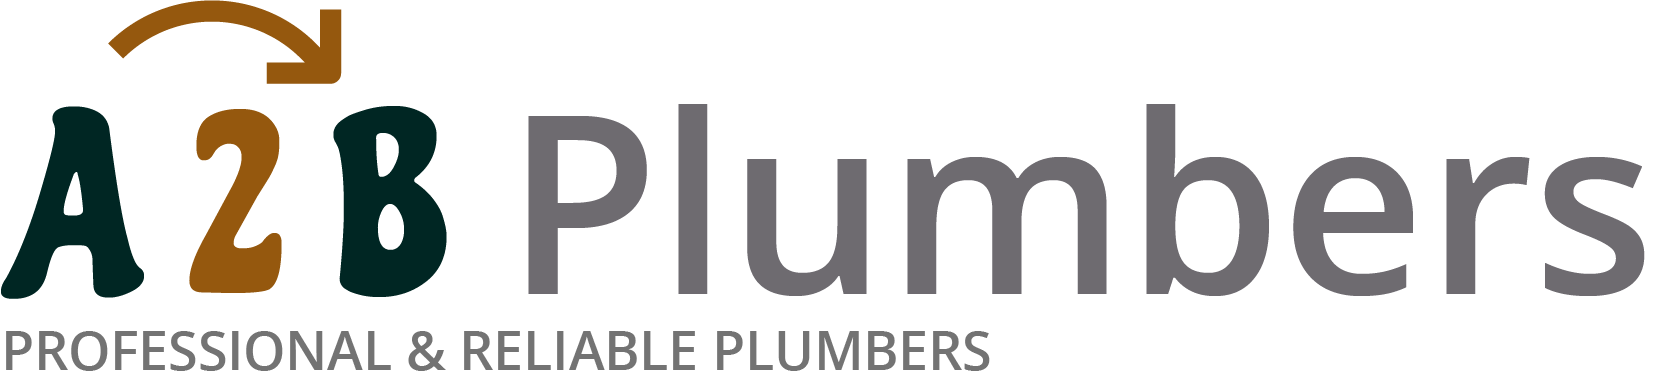 If you need a boiler installed, a radiator repaired or a leaking tap fixed, call us now - we provide services for properties in Fulwood and the local area.